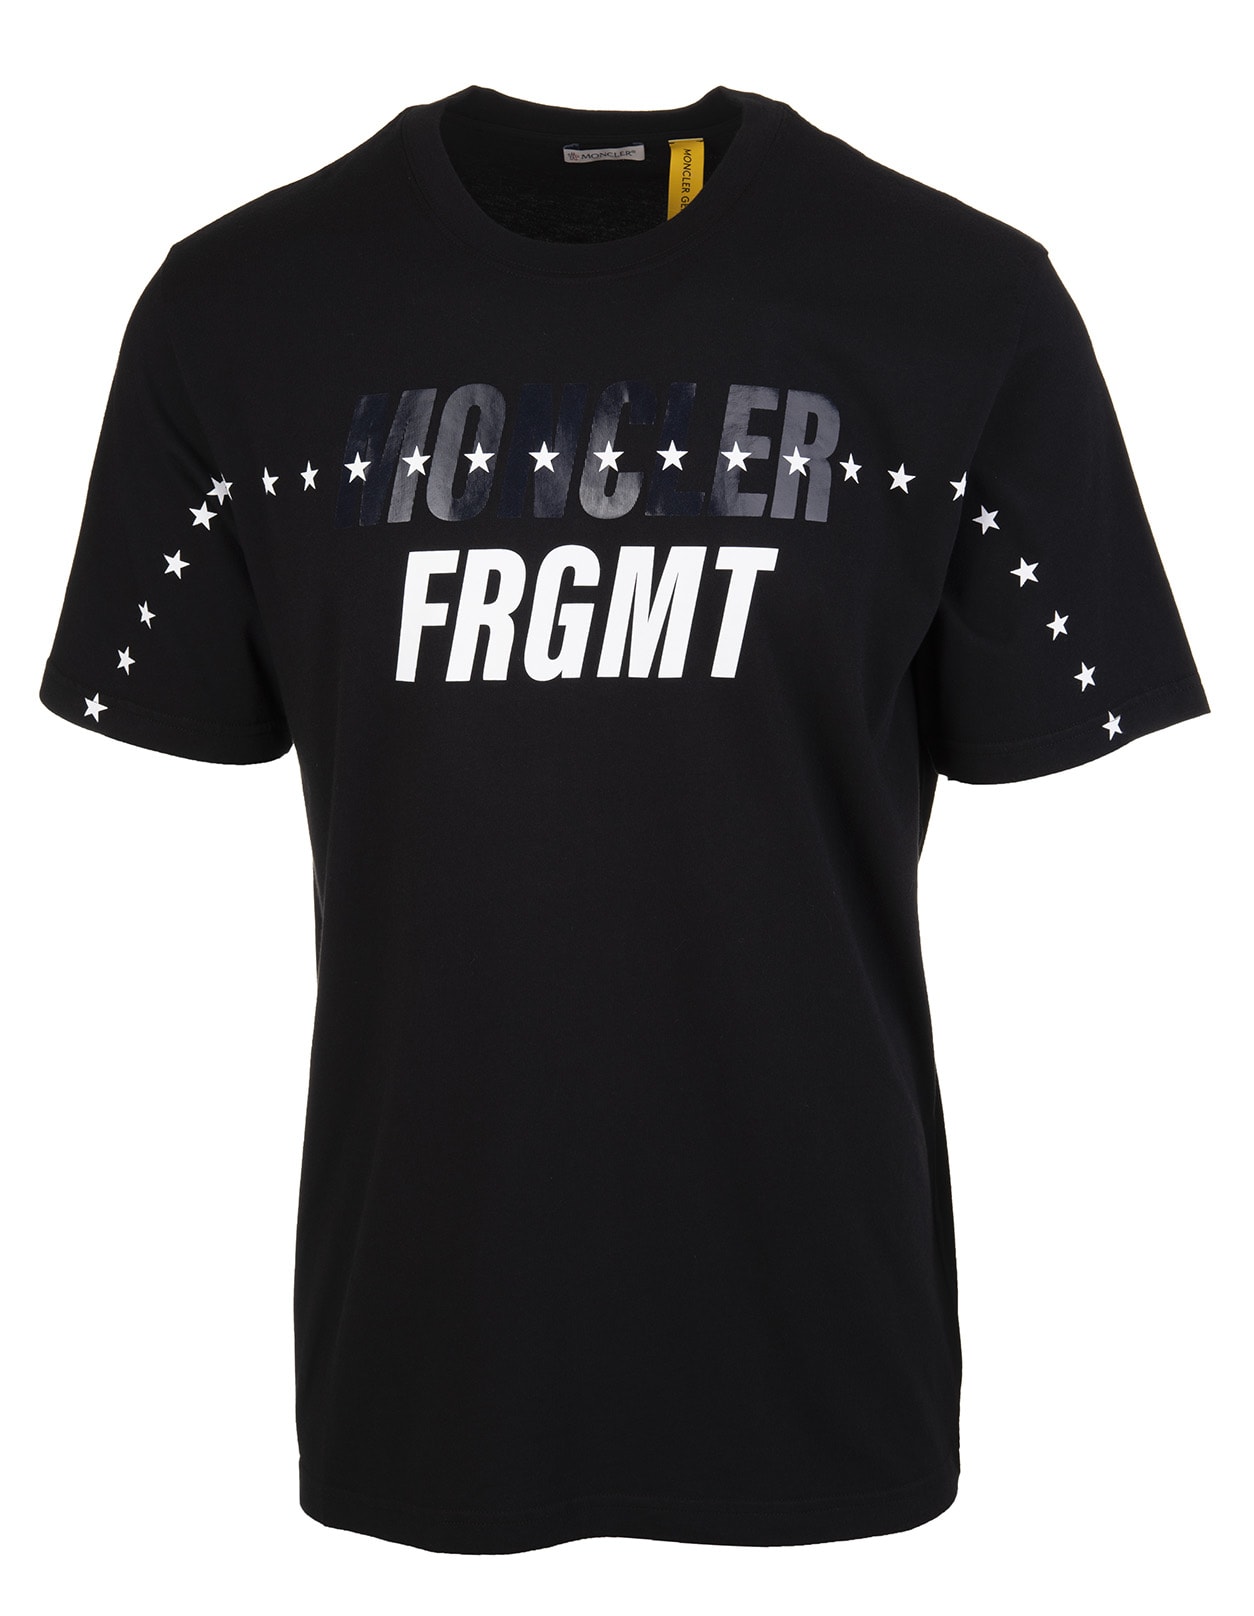 Moncler Man Black Over Fit Frgmt T-shirt With Stars